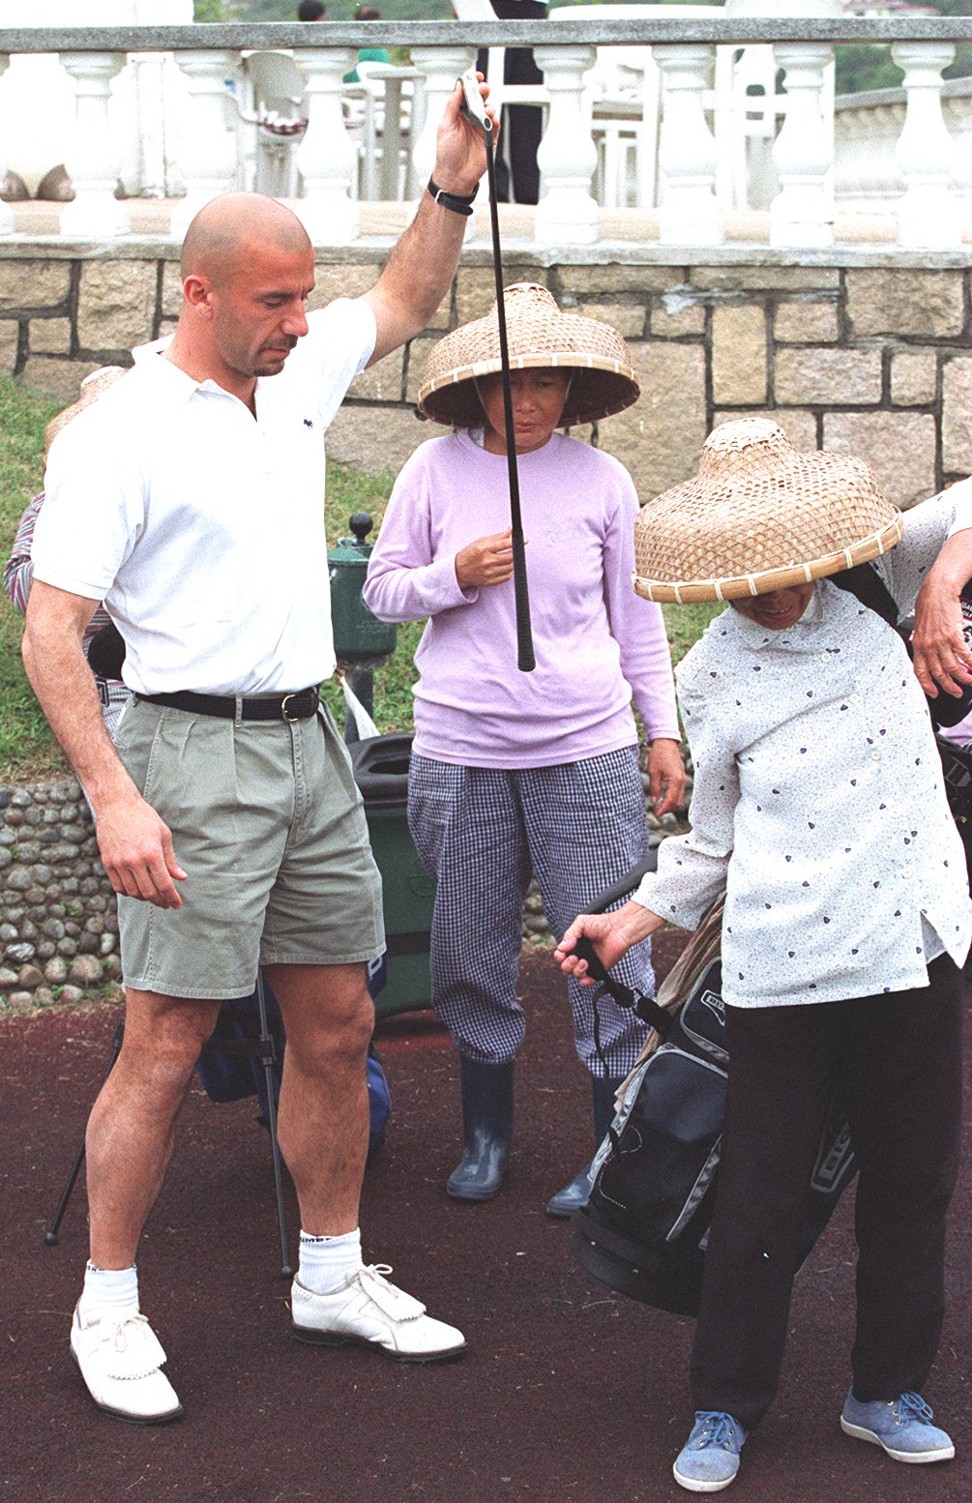 Vialli at Shek O Golf Club in a pre-startup world, when Chelsea visited Hong Kong in 1999. Photo: SCMP